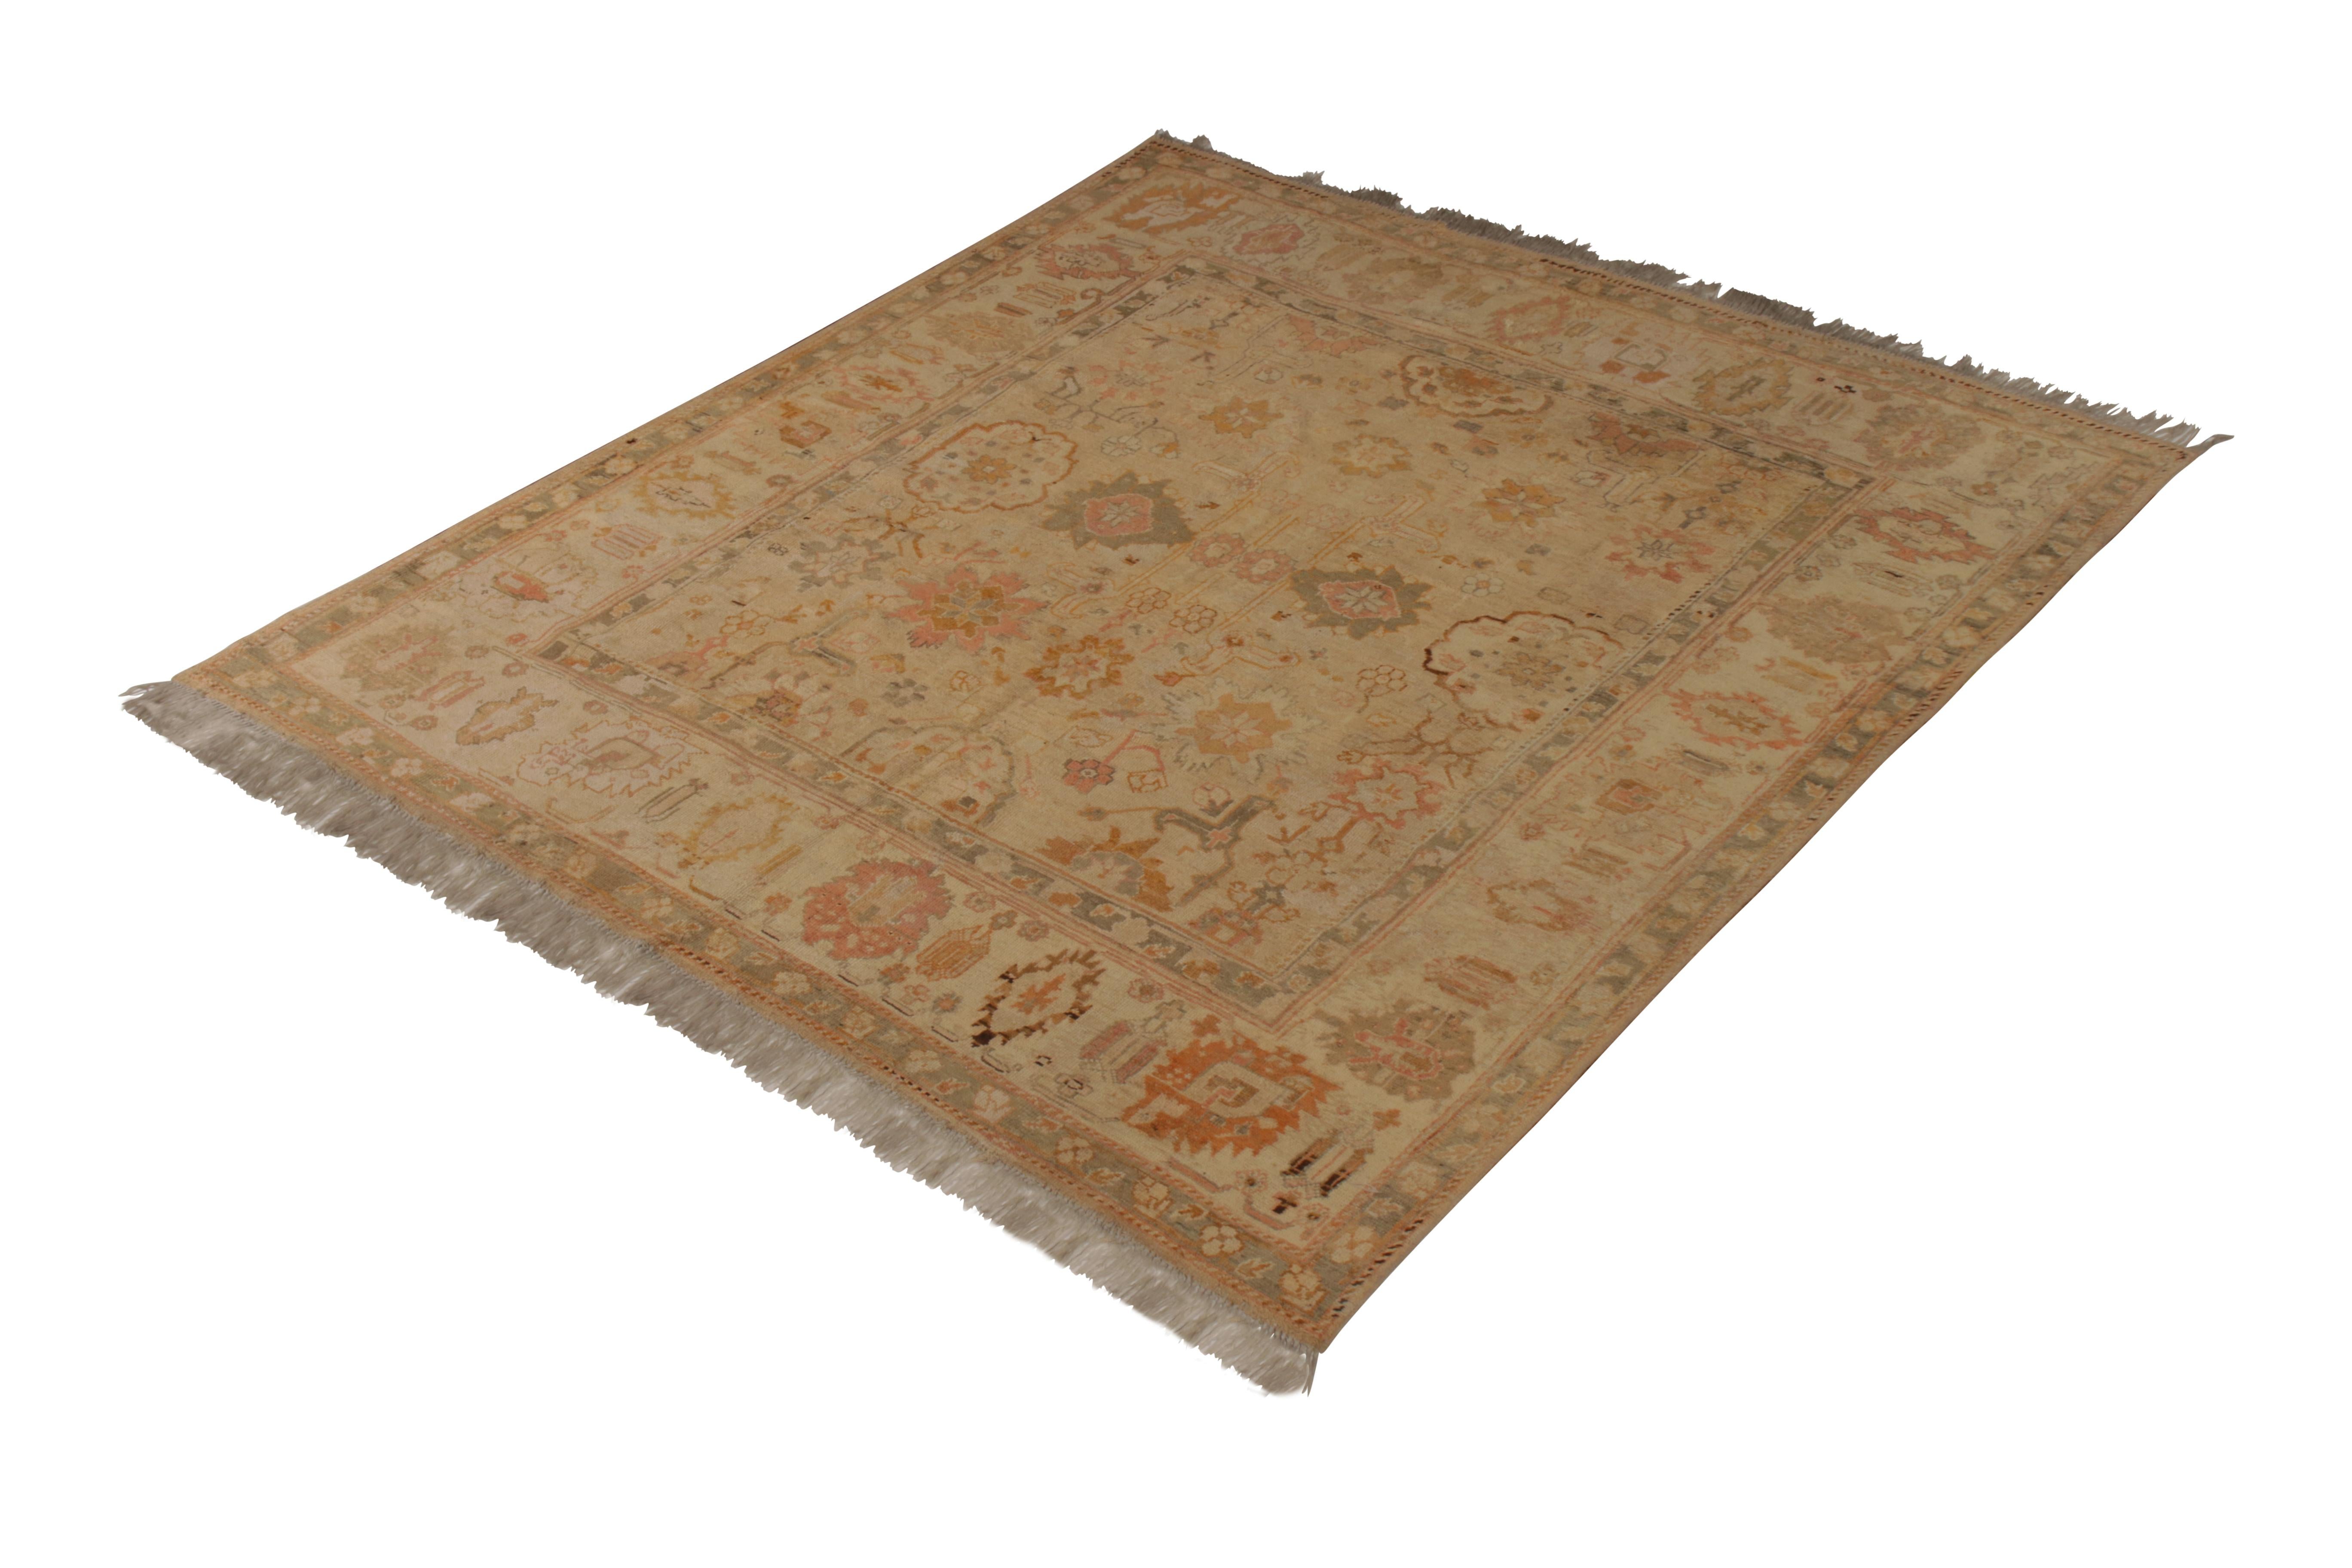 Hand knotted in wool originating from Turkey circa 1880-1890, this 9x10 antique rug is remarked as one of the best classic Oushak rugs our principal Josh has seen in 40 years of collecting the style—an exemplary piece in good condition for its age